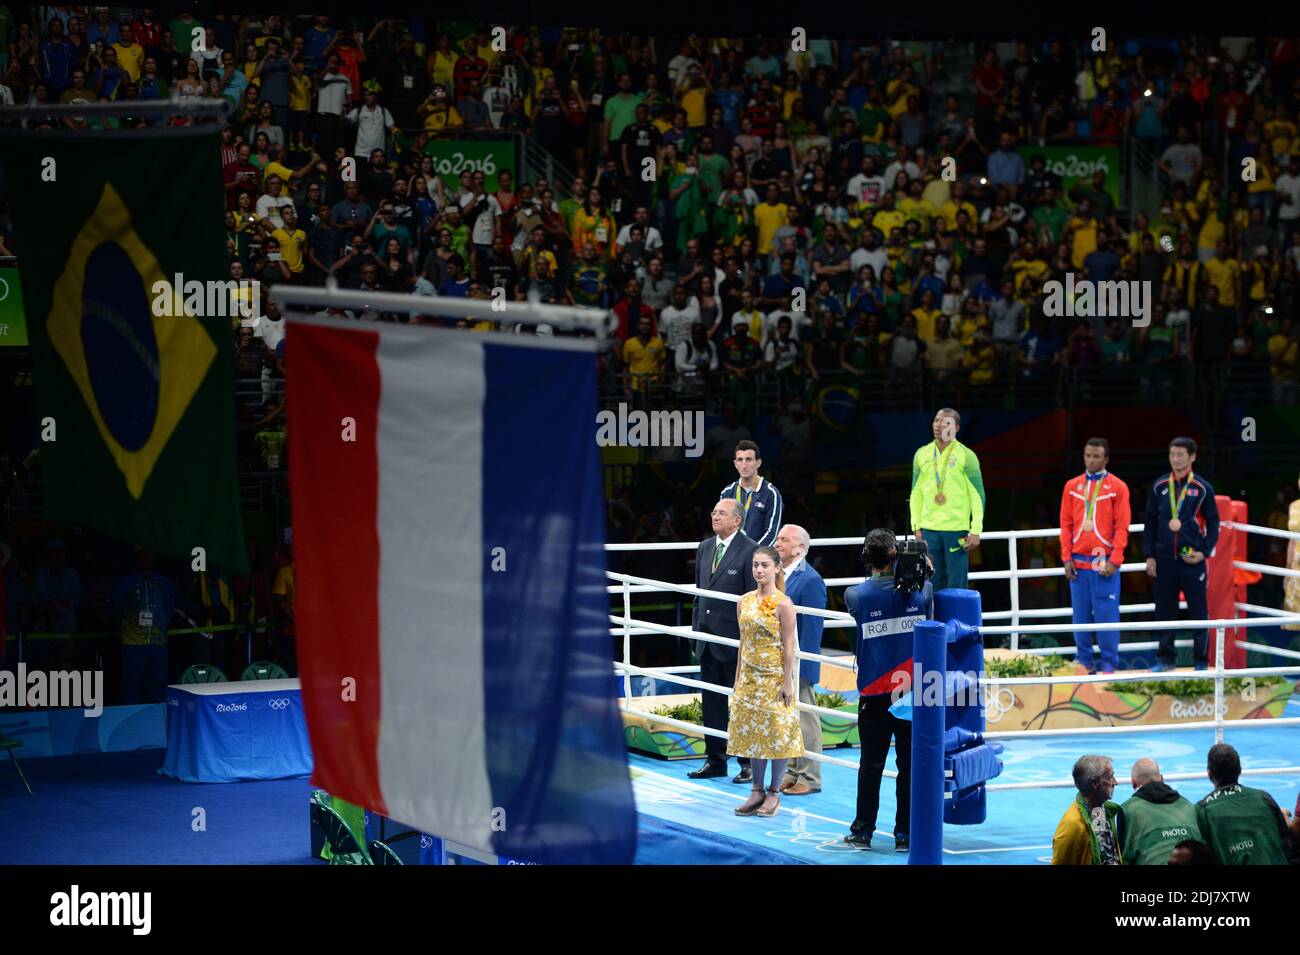 Silver medalist Sofiane Oumiha of France, gold medalist Robson Conceicao of Brazil, bronze medalist Lazaro Jorge Alvarez of Cuba and bronze medalist Otgondalai Dorjnyambuu of Mongolia stand on the podium during the medal ceremony for the Men's Light (60kg) boxing event on Day 11 of the Rio 2016 Olympic Games at Riocentro - Pavilion 6 on August 16, 2016 in Rio de Janeiro, Brazil. Photo by Lionel Hahn/ABACAPRESS.COM Stock Photo